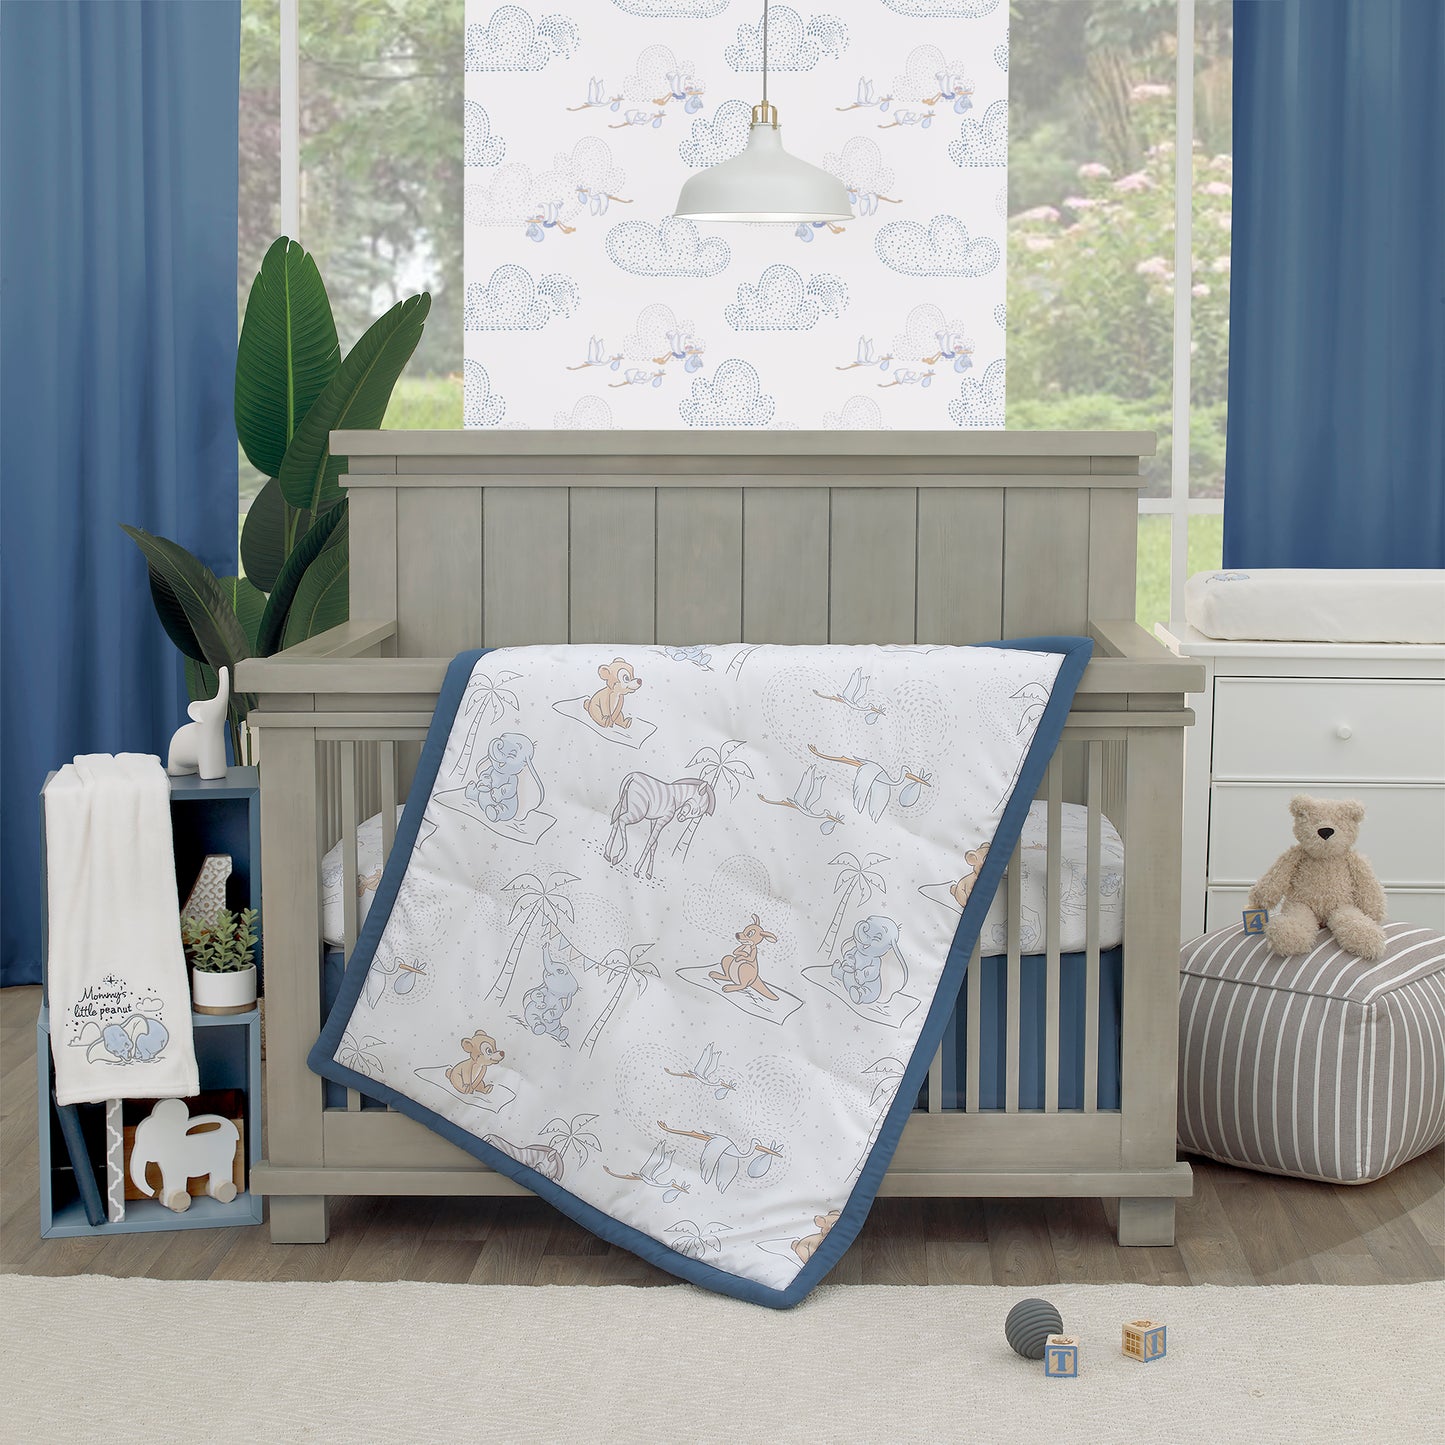 Disney Dumbo Mommy's Little Peanut Ivory, Gray, and Blue Kangaroo, Bear, Zebra, and Stork with Palm Trees 6 Piece Nursery Crib Bedding Set - Comforter, Two Fitted Crib Sheets, Crib Skirt, Blanket and Changing Pad Cover